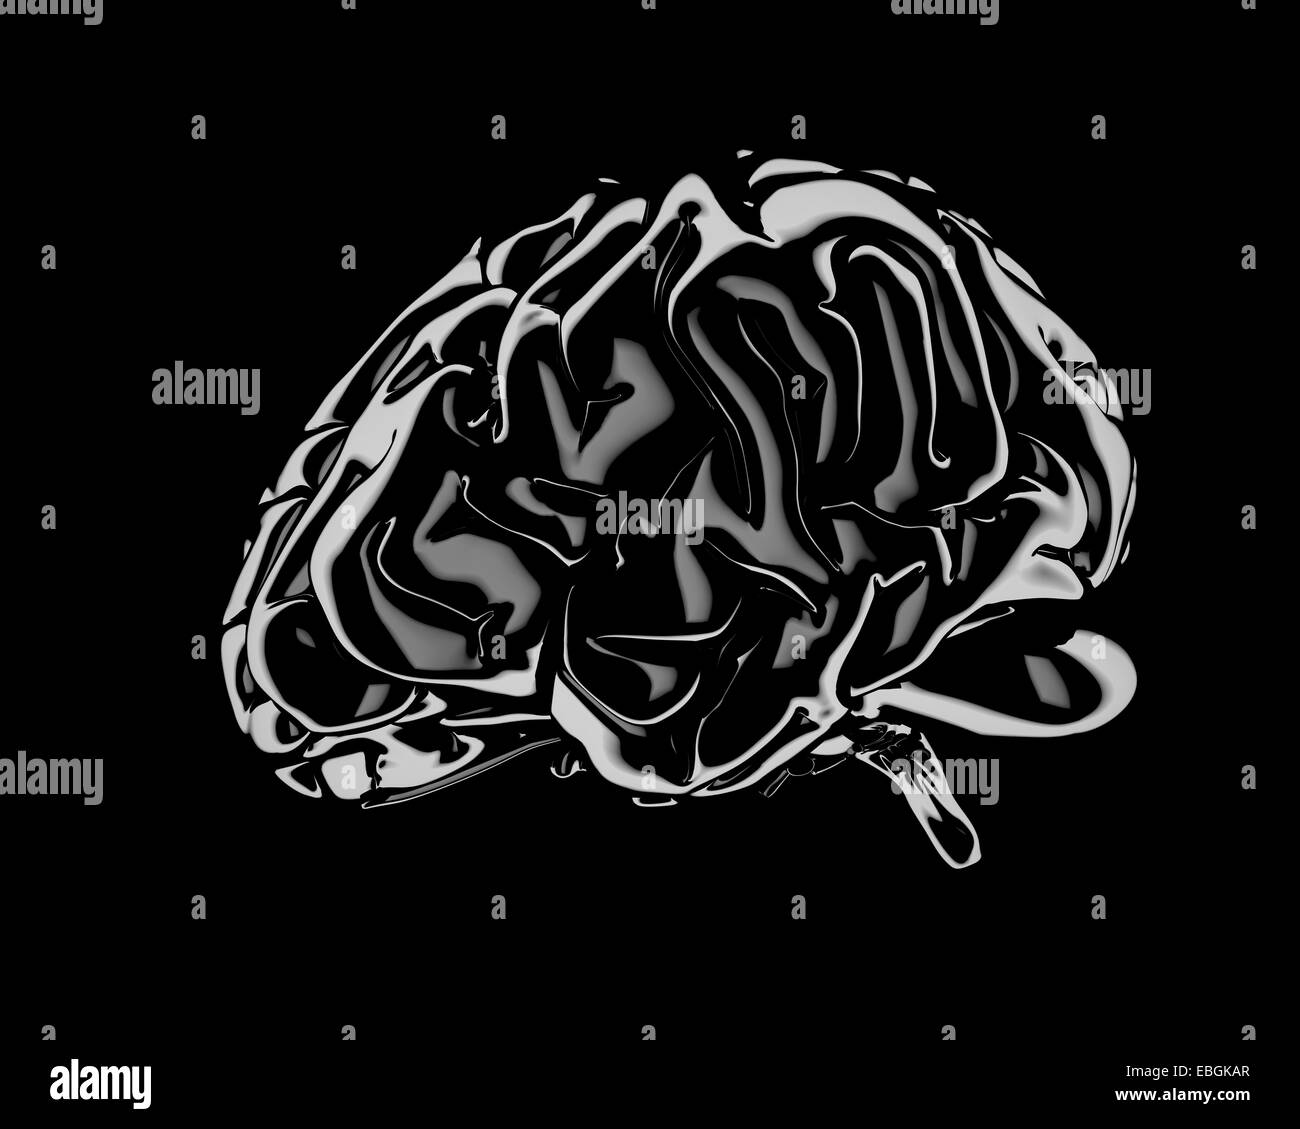 Still life render of a Human Brain over black background Stock Photo